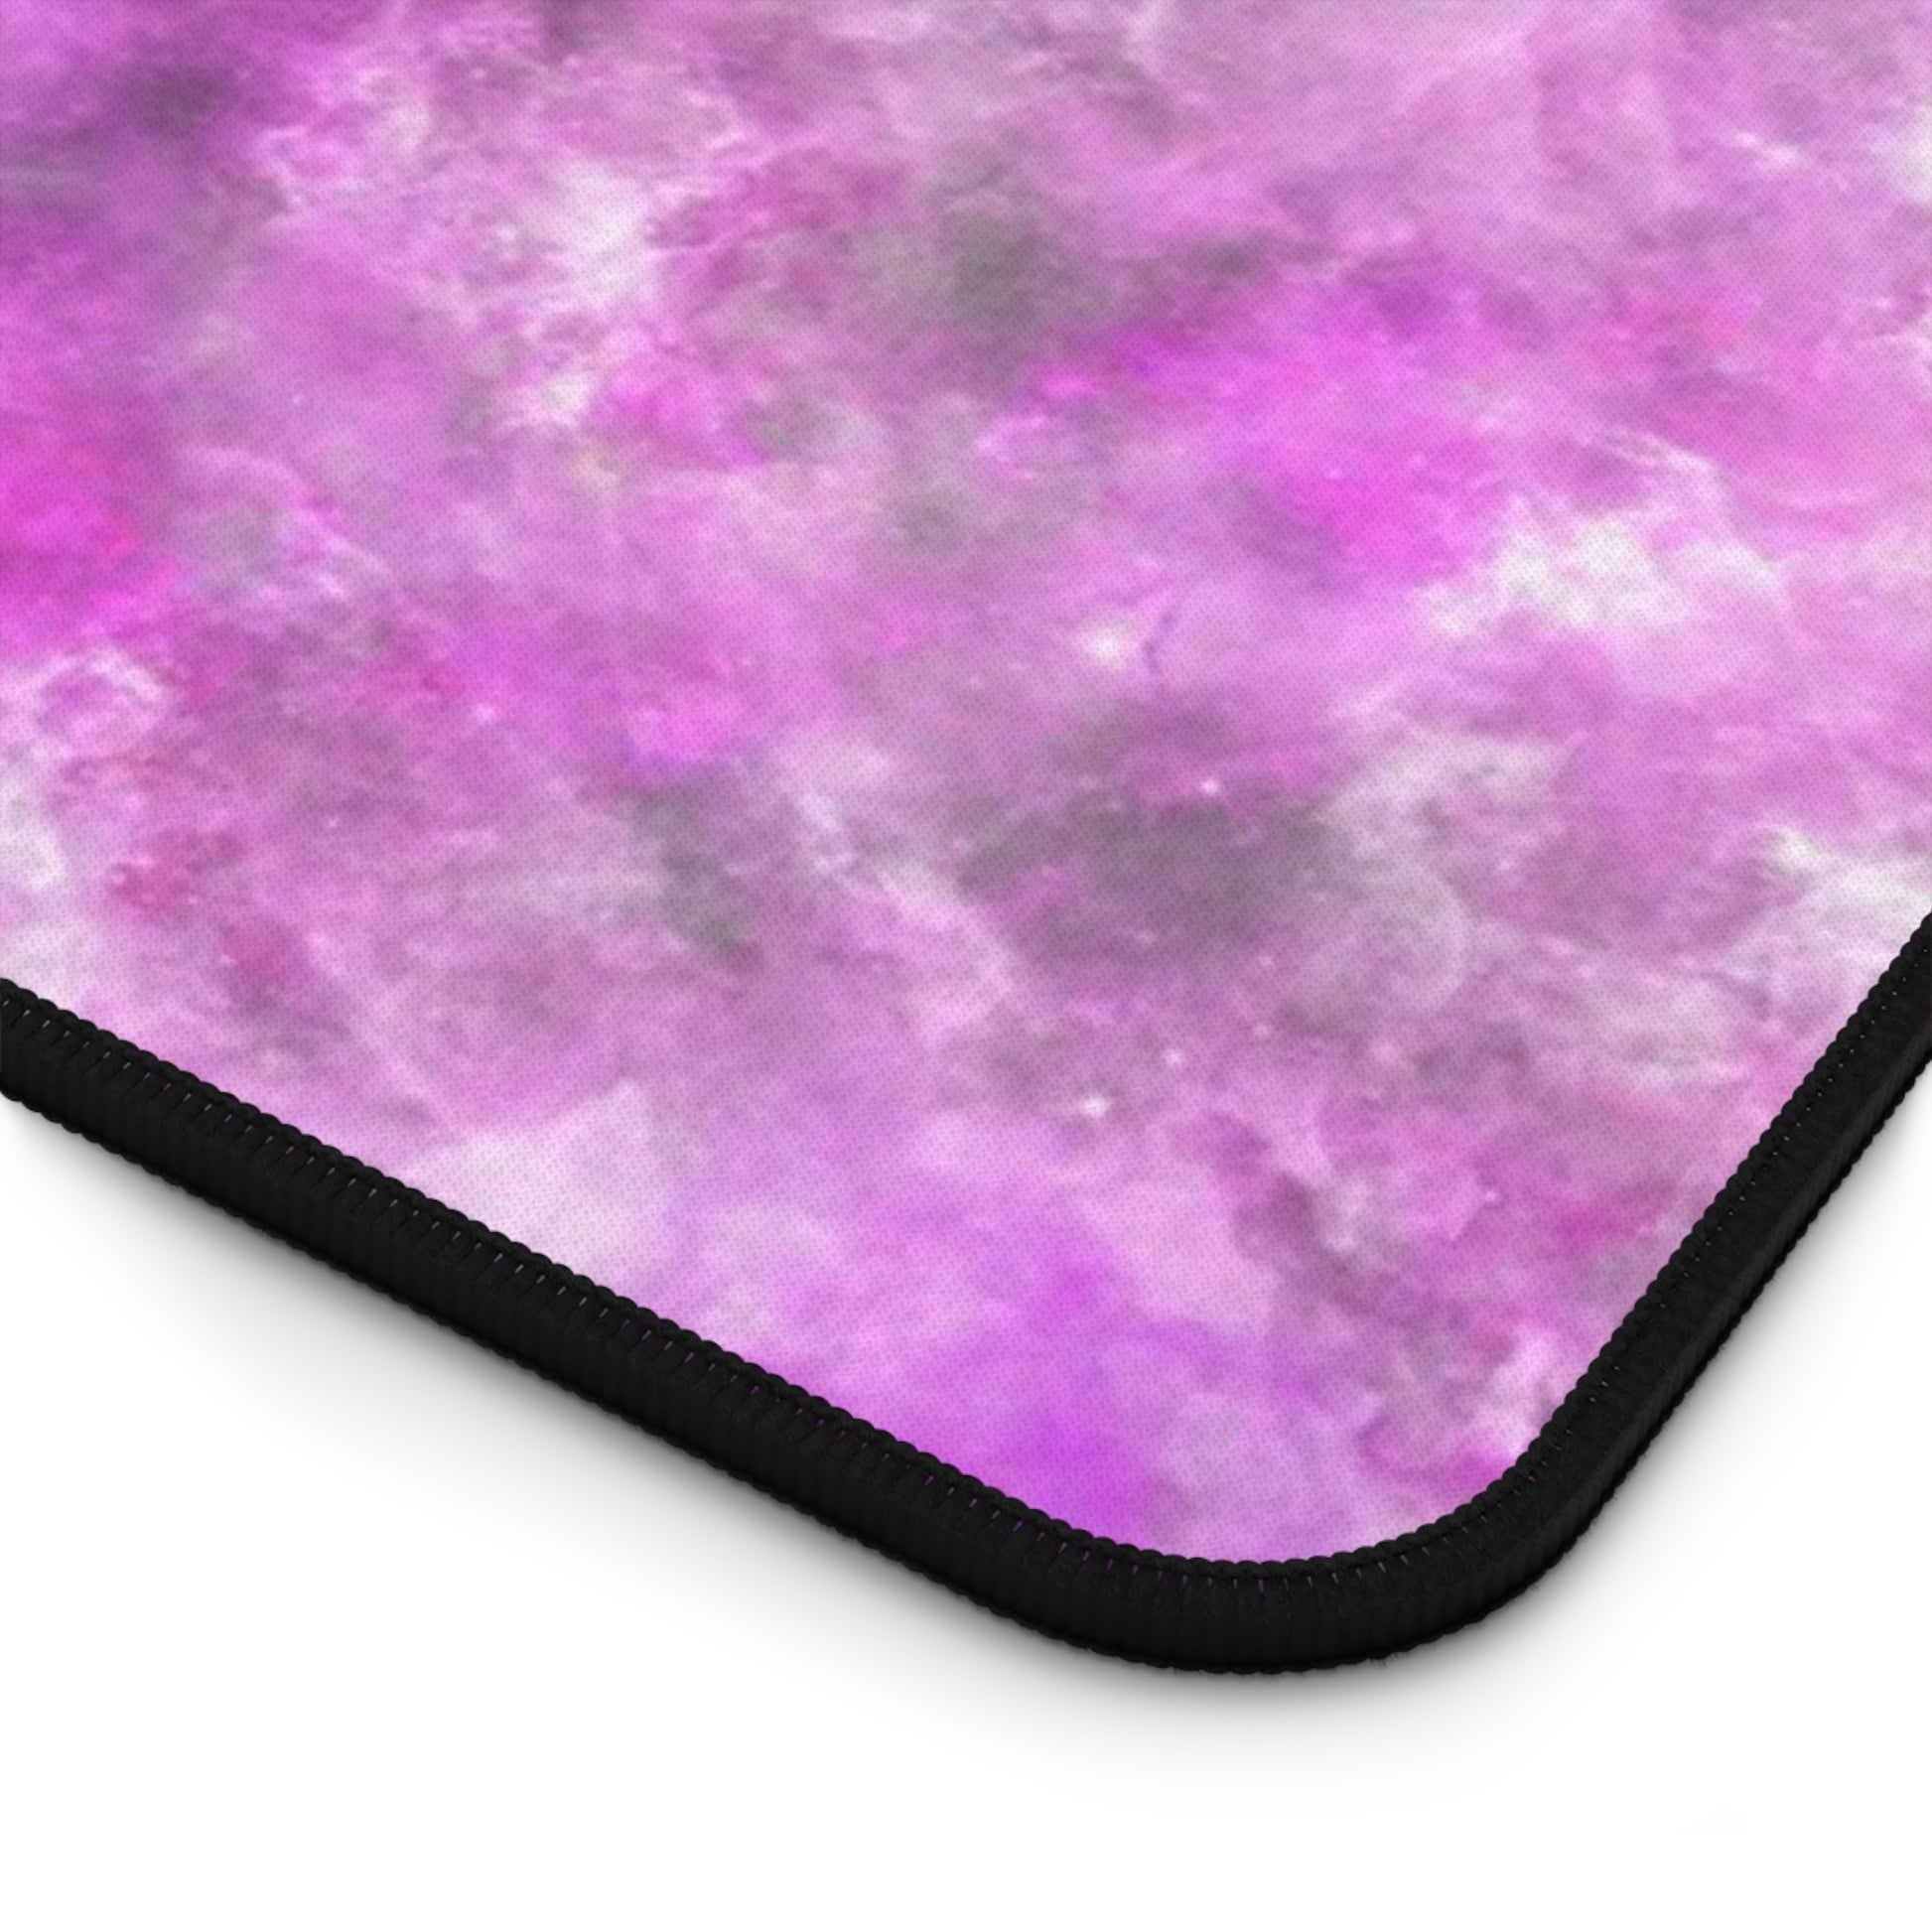 The corner of a 31" x 15.5" desk mat with a fluffy mix of pink, white, and gray.